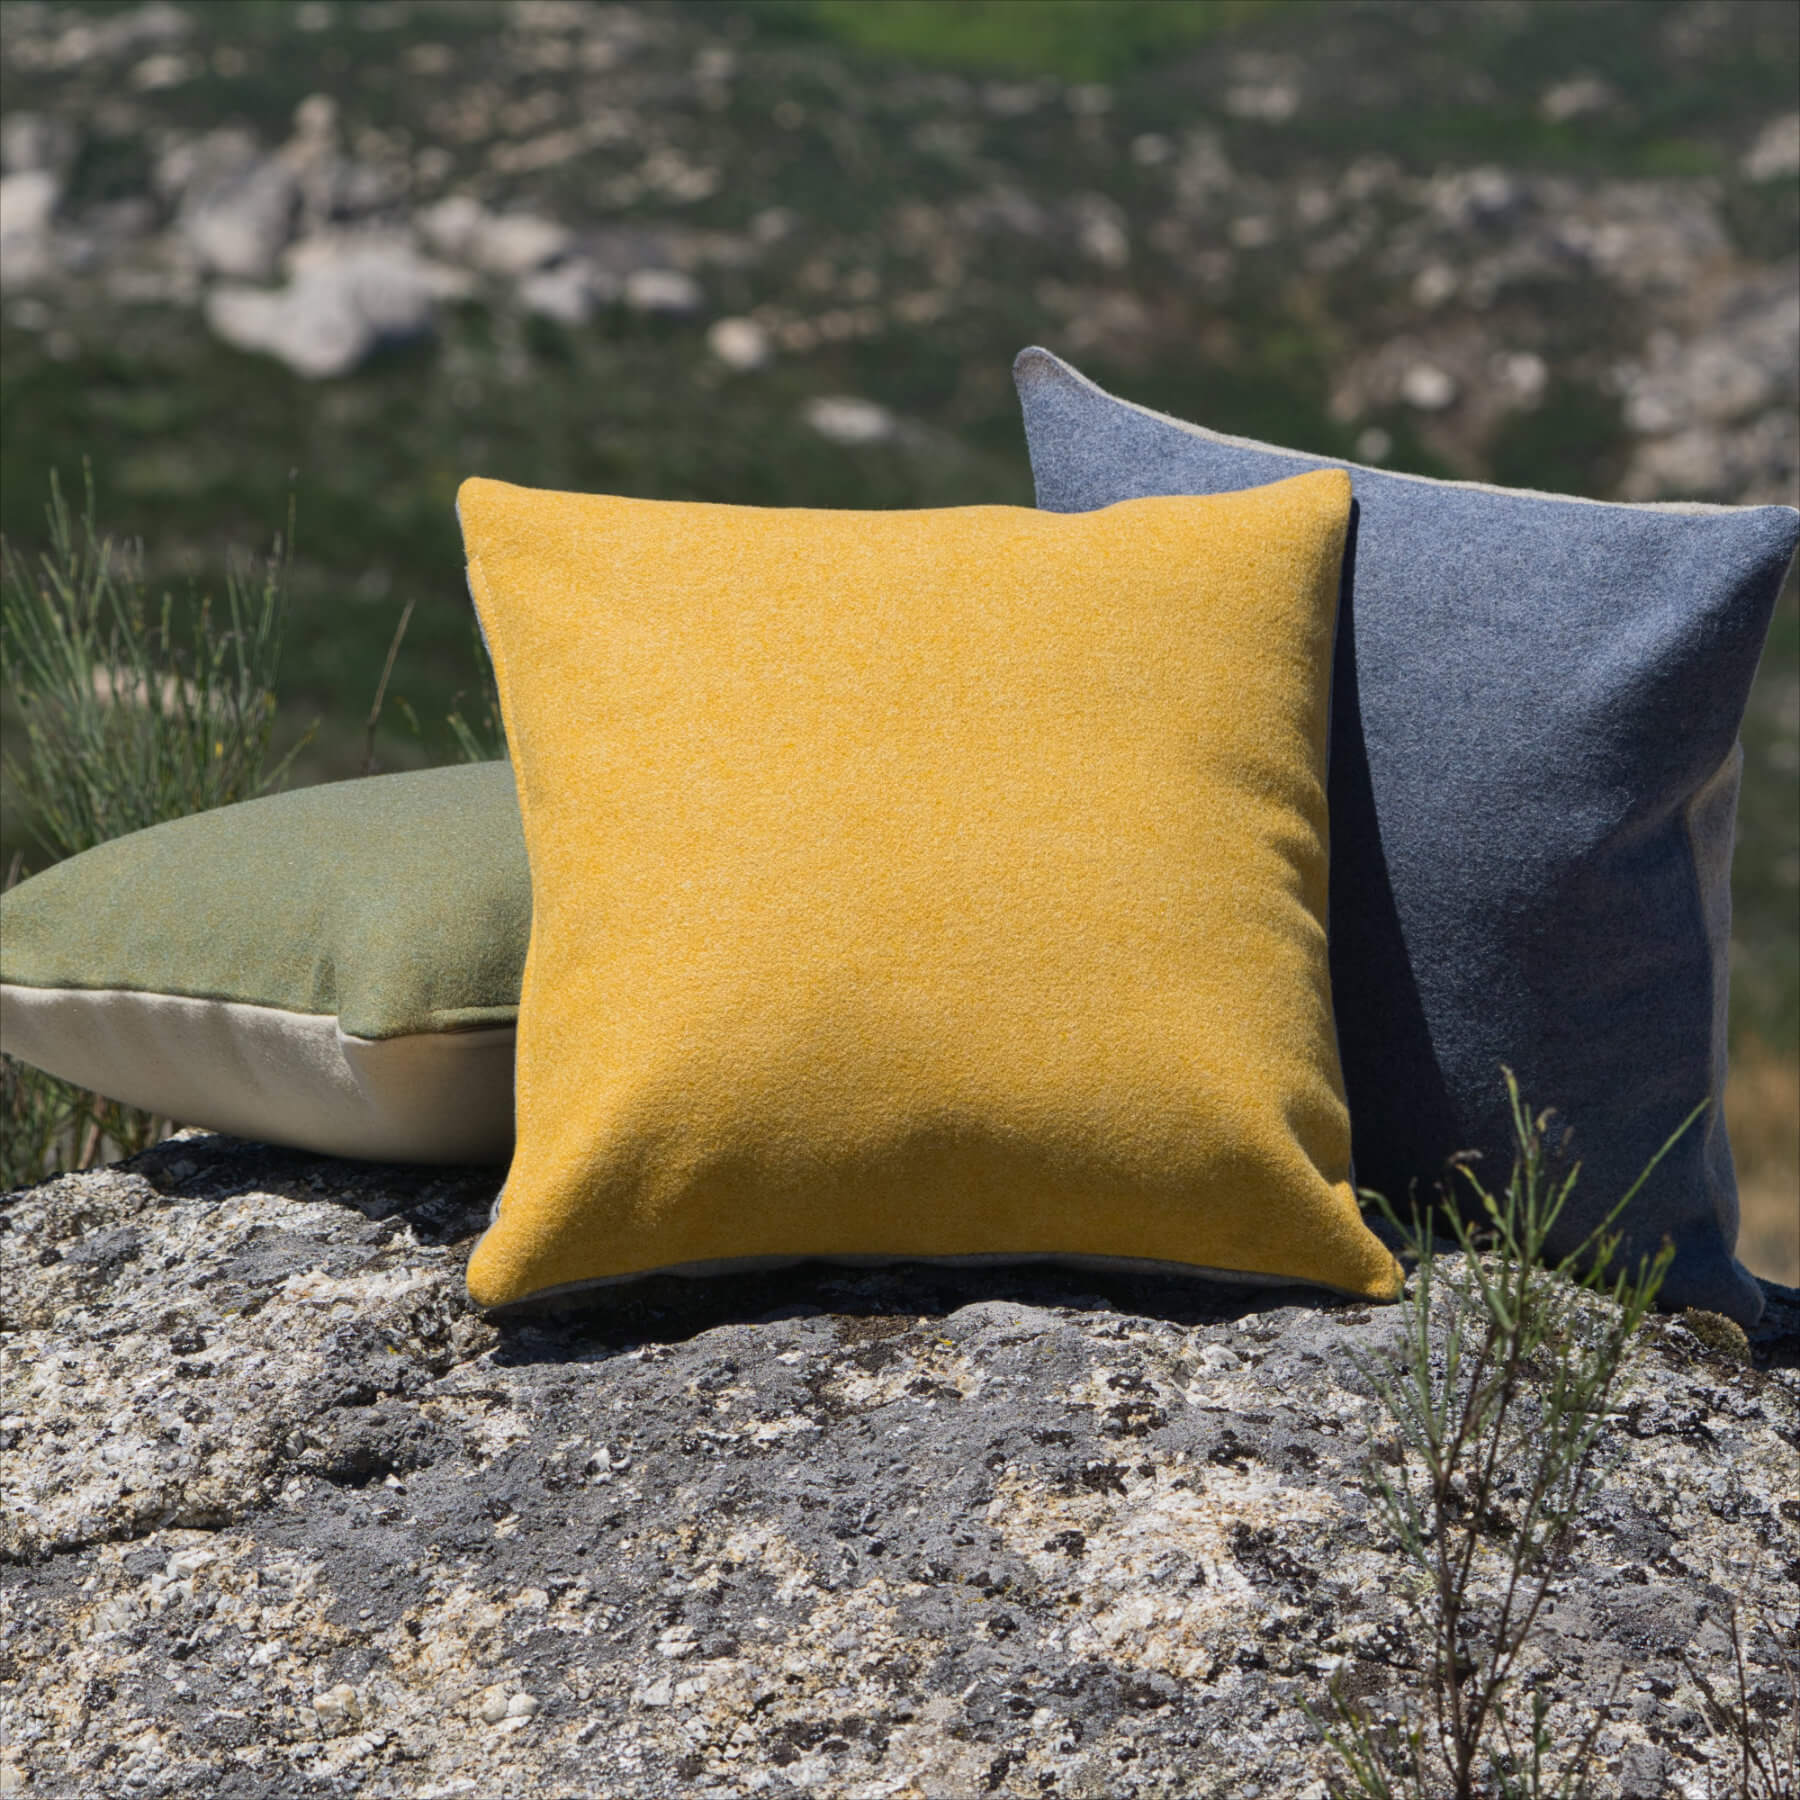 Decorative Cushion Bicolor 40 x 40 cm, 100% Sheep's Wool – Double-Sided: Amber & Light Gray